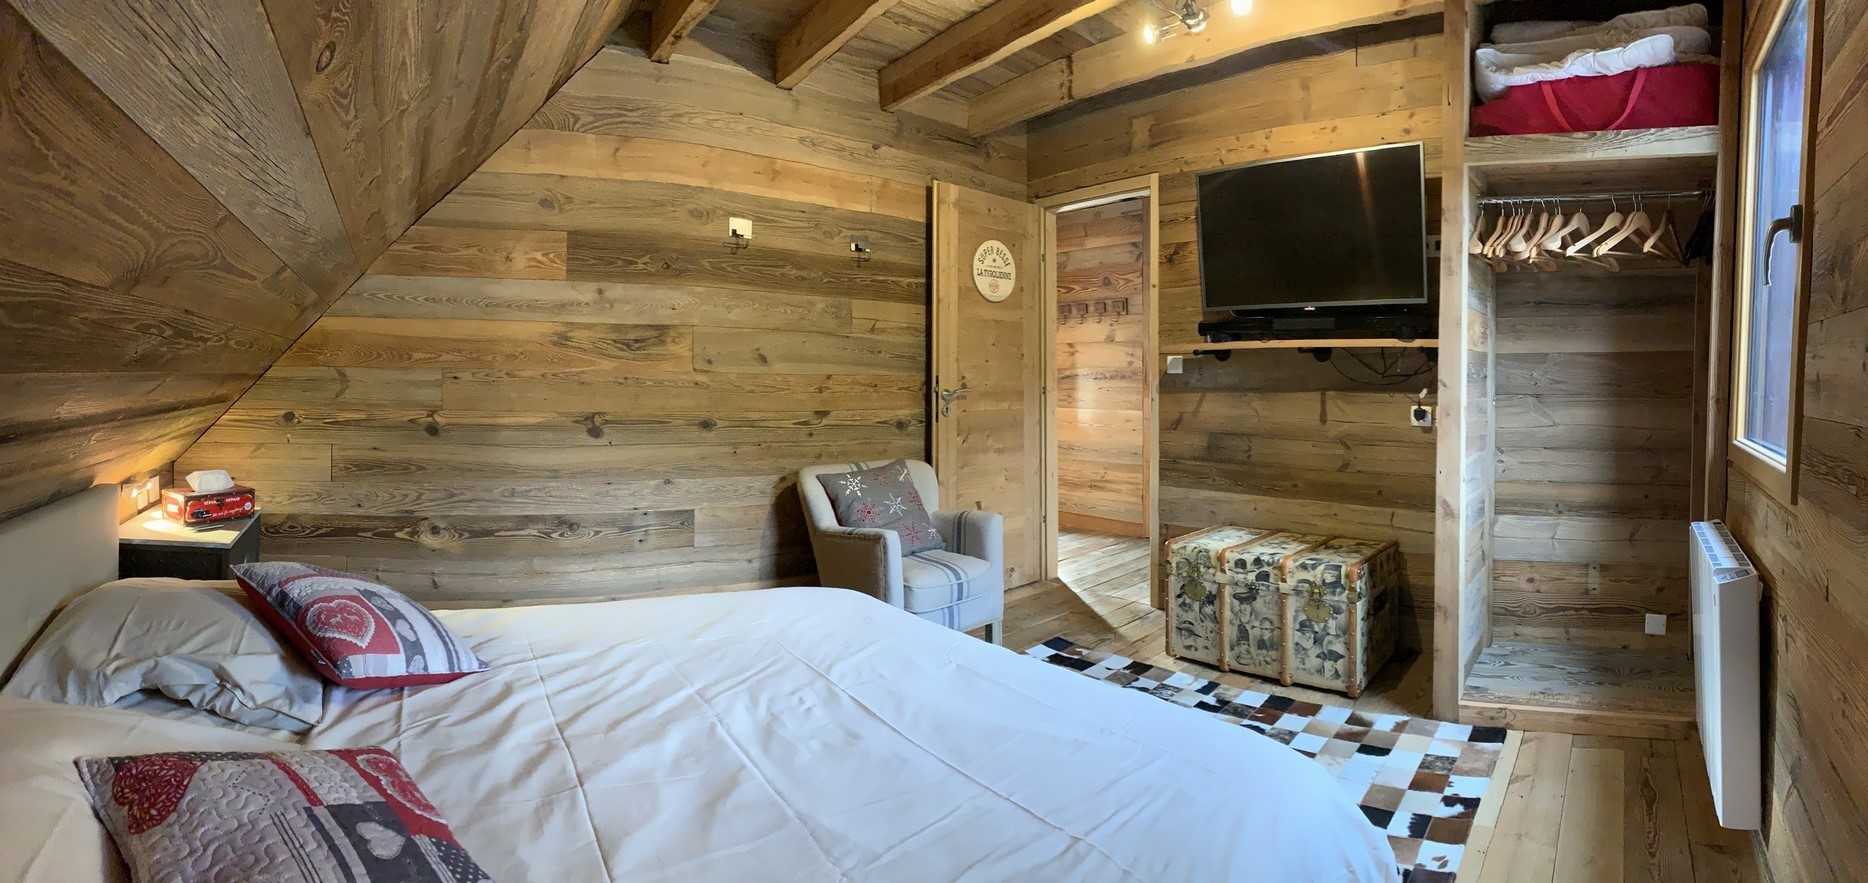 Chalet l'Anorak, Tyrolean room, King Size bed, overview